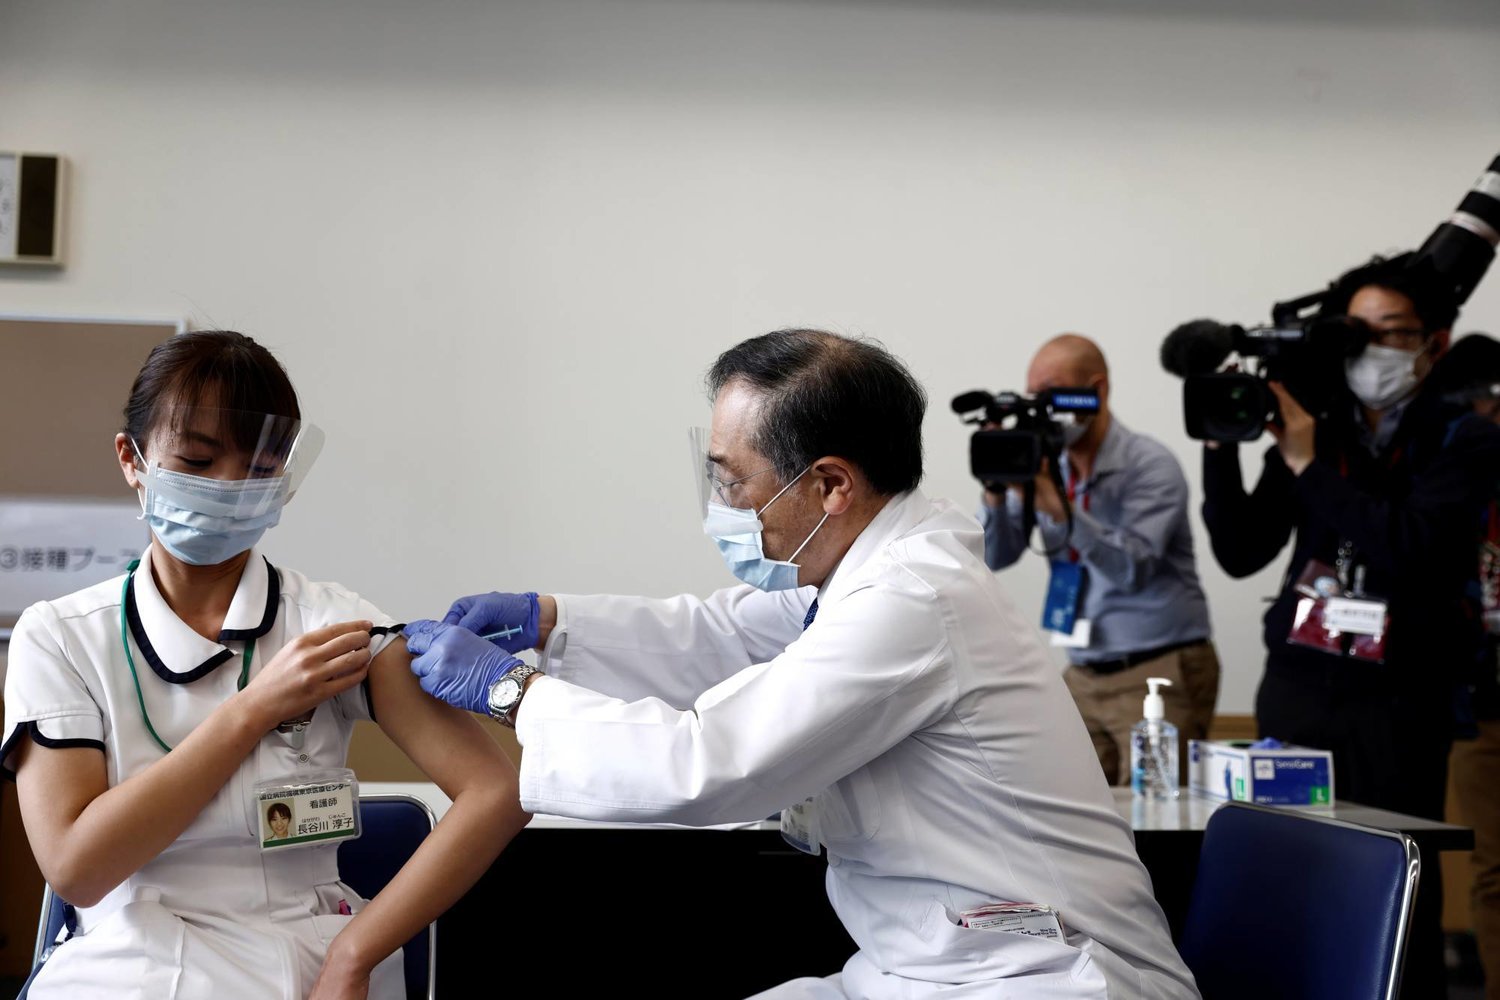 A medical worker receives a dose of the COVID-19 vaccine at Tokyo Medical Center. Reuters